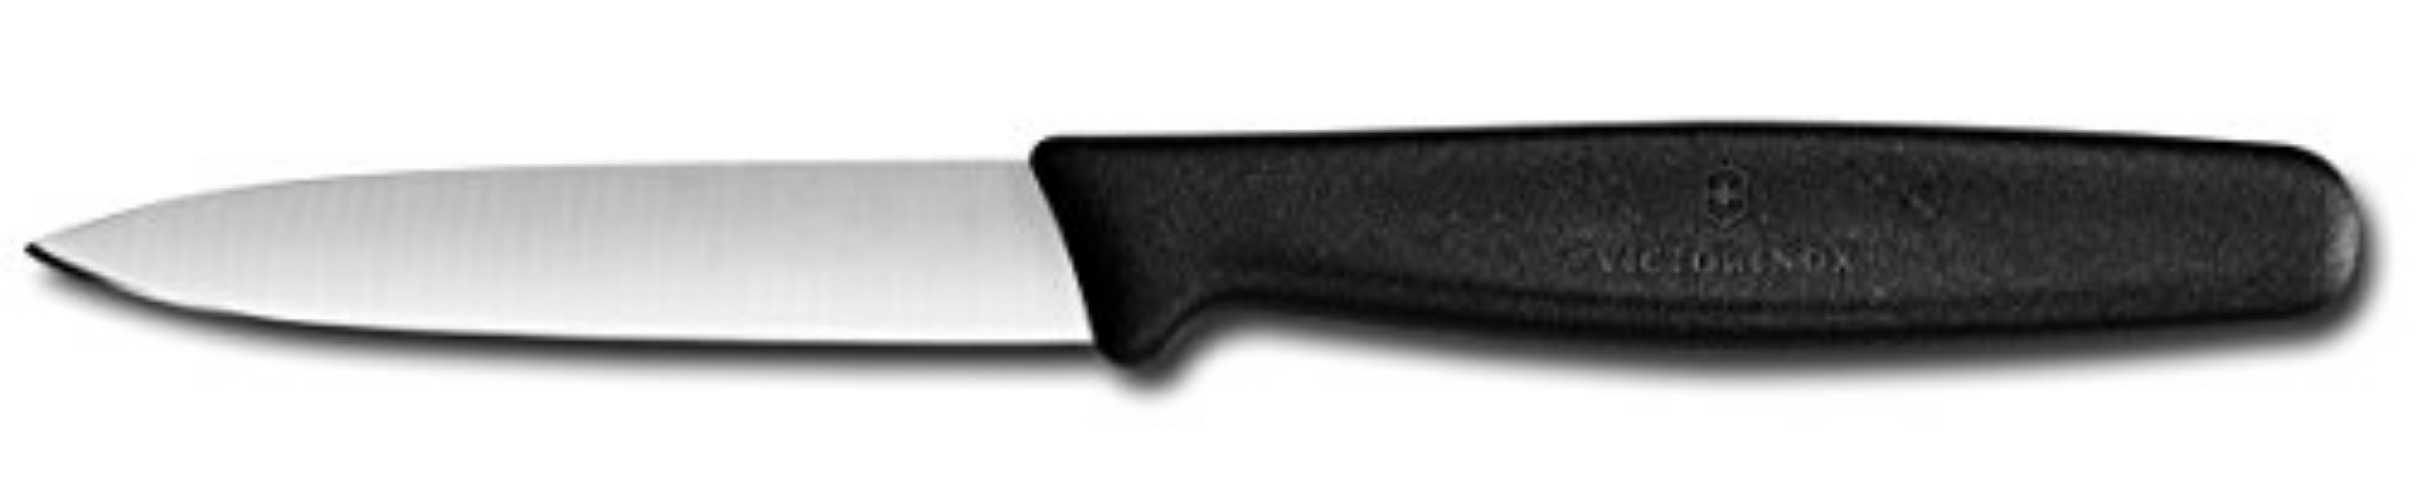 Victorinox 3.25 Inch Paring Knife with Straight Edge, Spear Point, Black - Standard Packaging